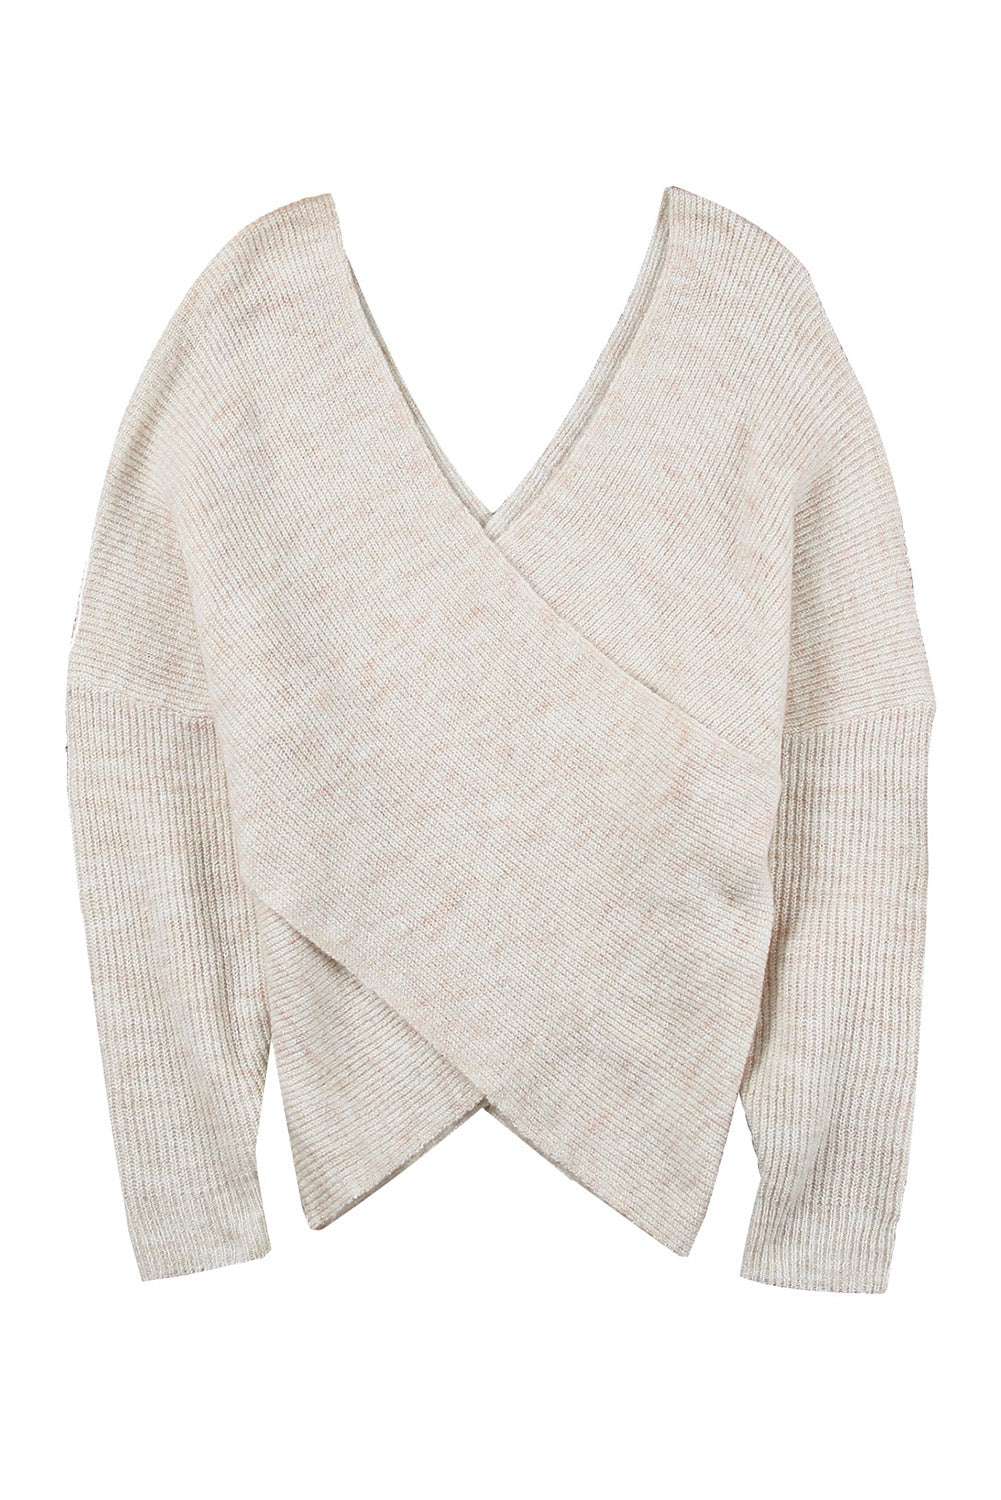 Criss Cross Wrap Plunging Neck Sweater - Passion of Essence Boutique